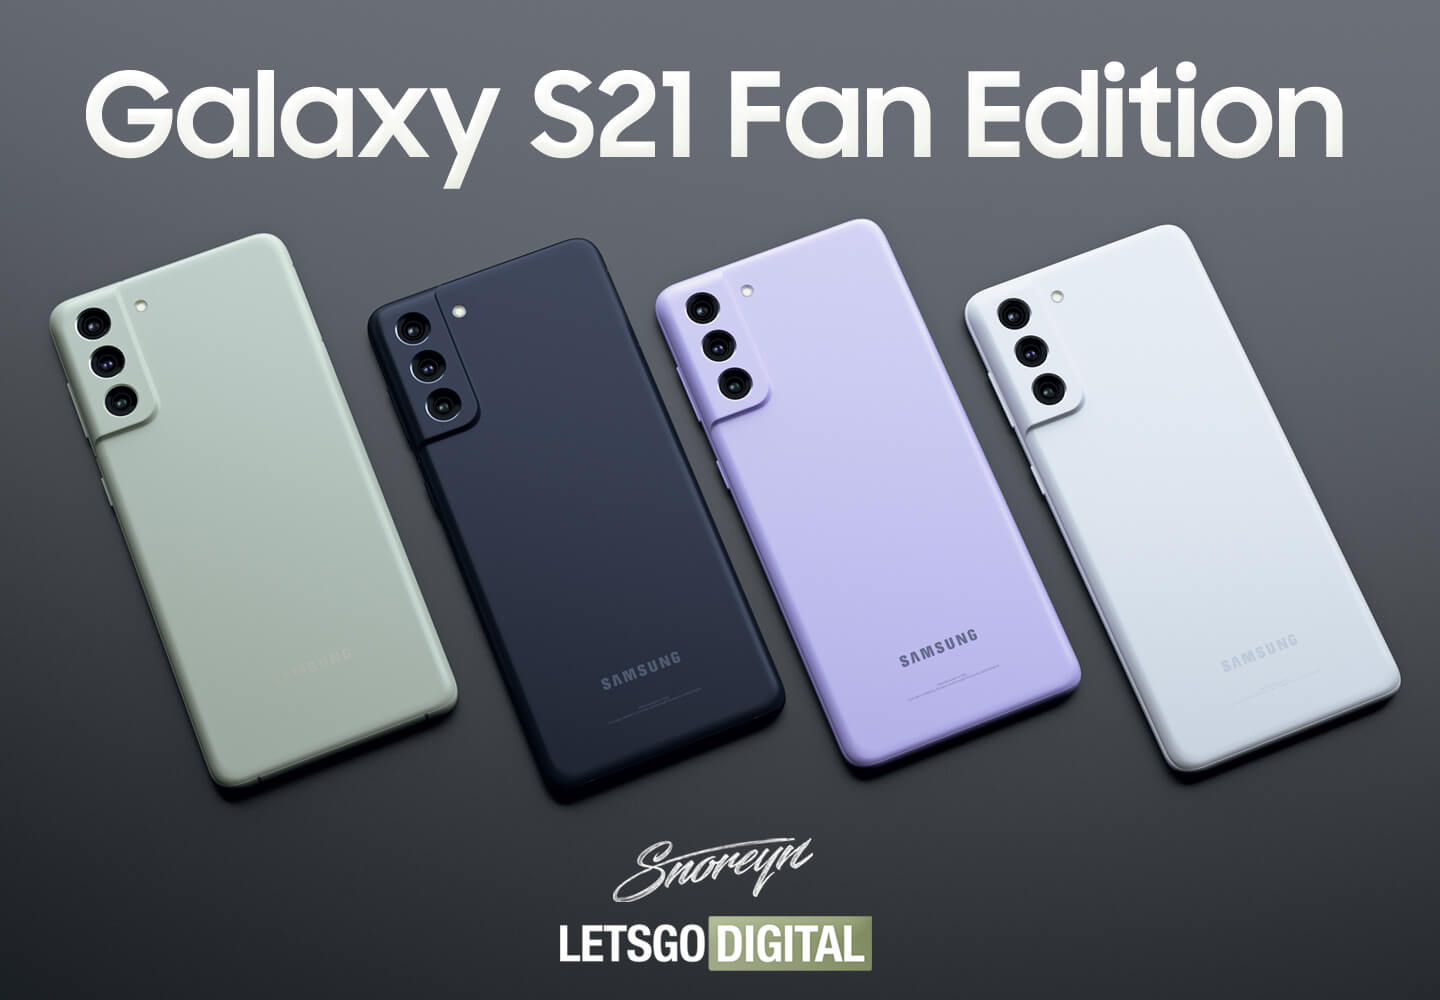 Samsung Launches the Galaxy S20 FE: Bringing Together Fans